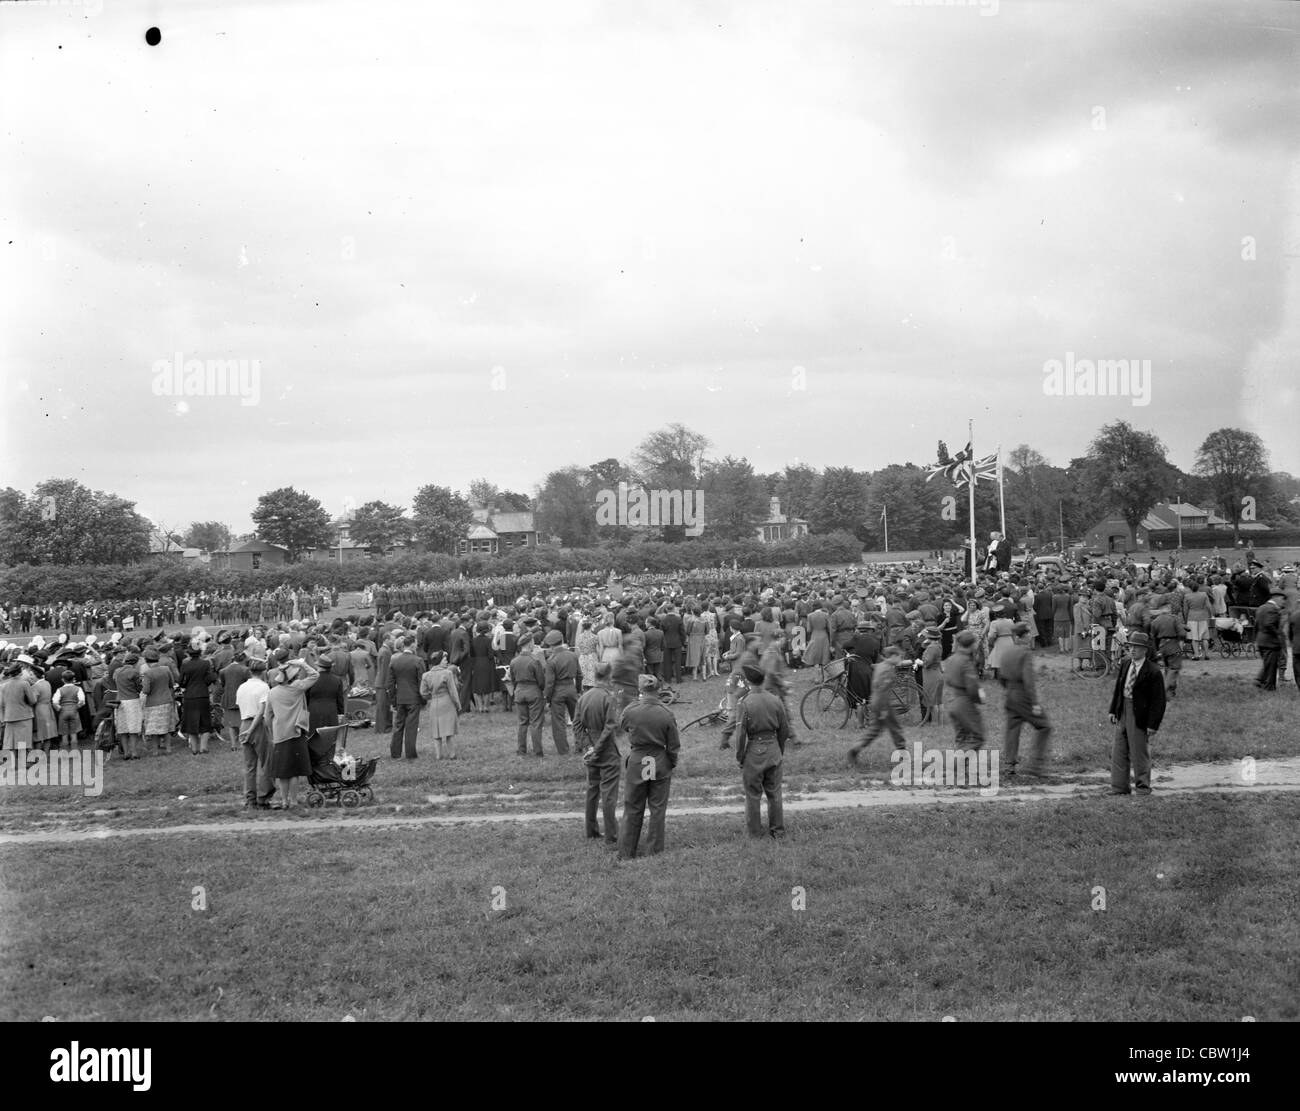 Europe and England during World War II. Large gathering of british in open field Stock Photo